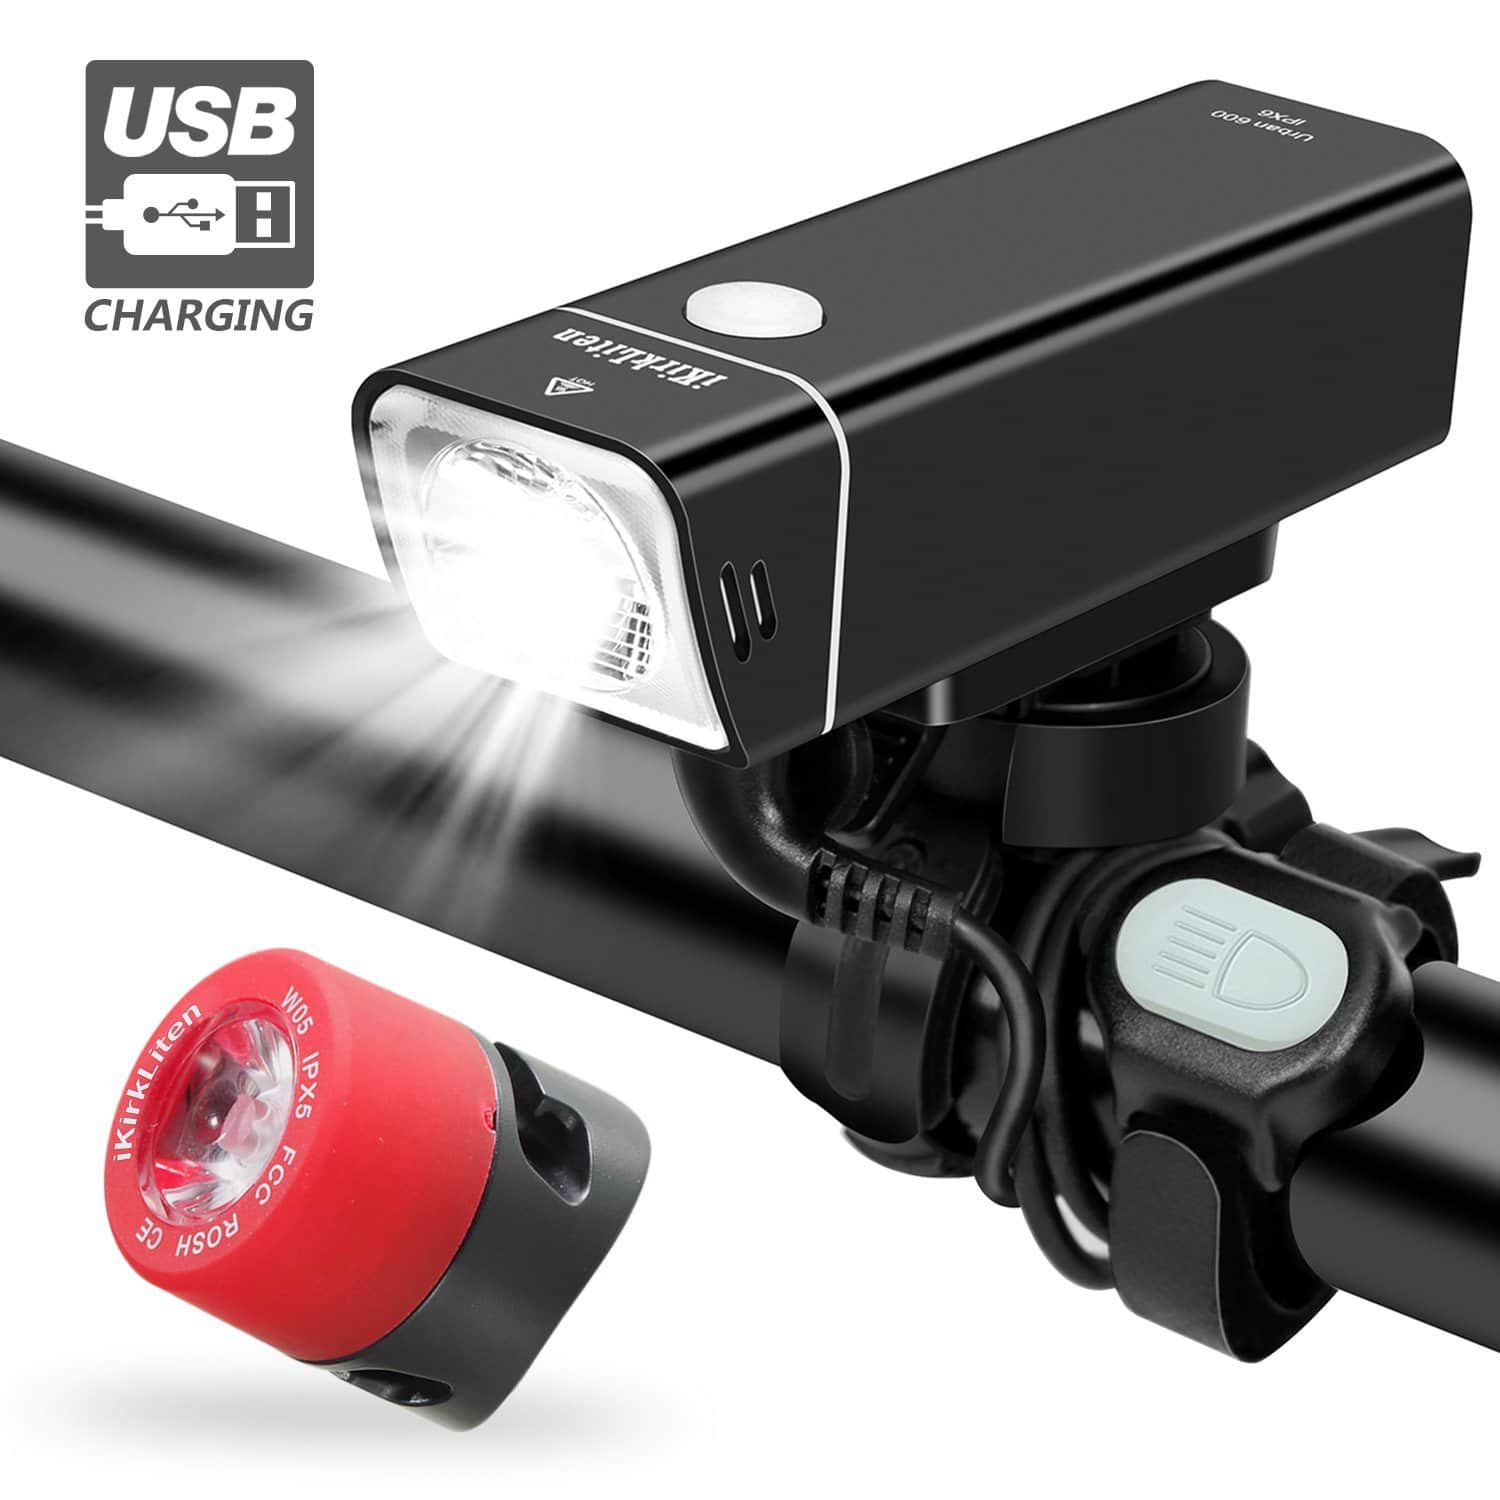 Top 10 Best LED Bike Lights in 2021 Reviews Buyer’s Guide